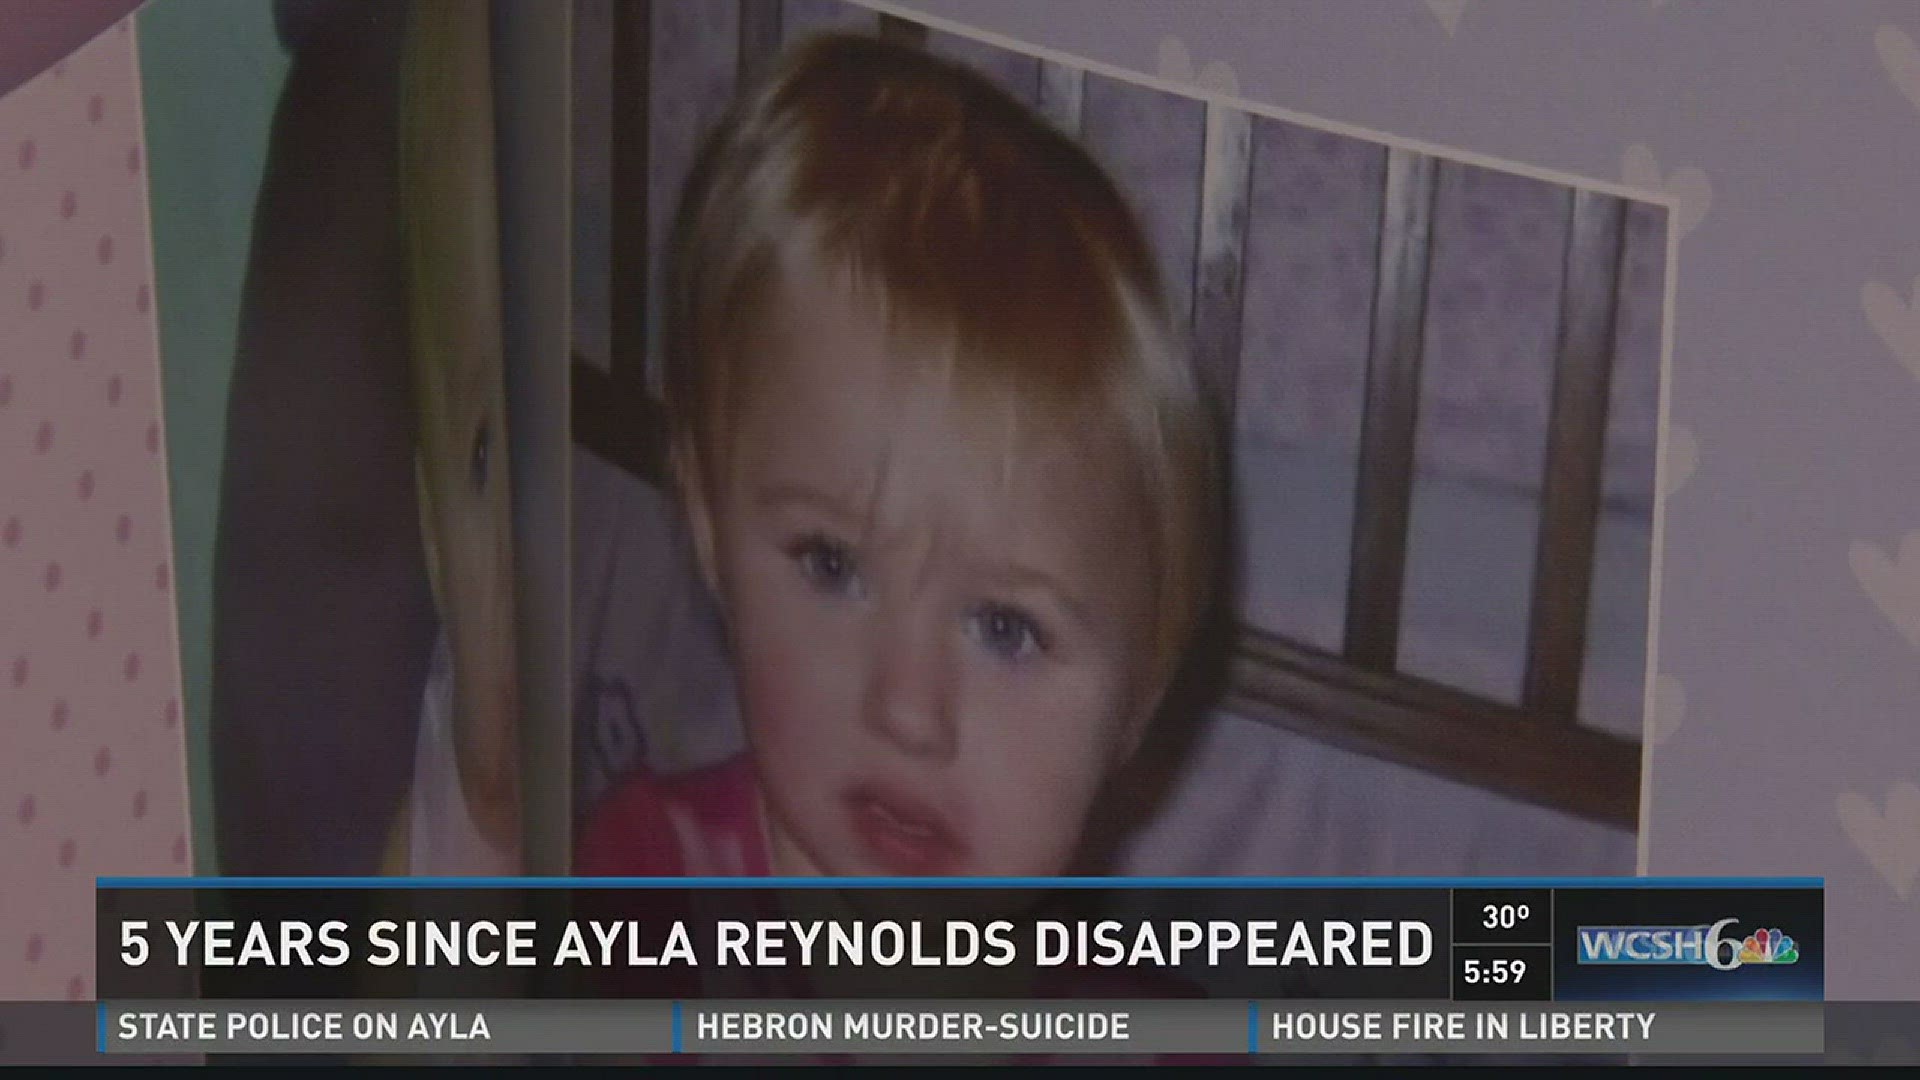 5 year anniversary of Ayla disappearance